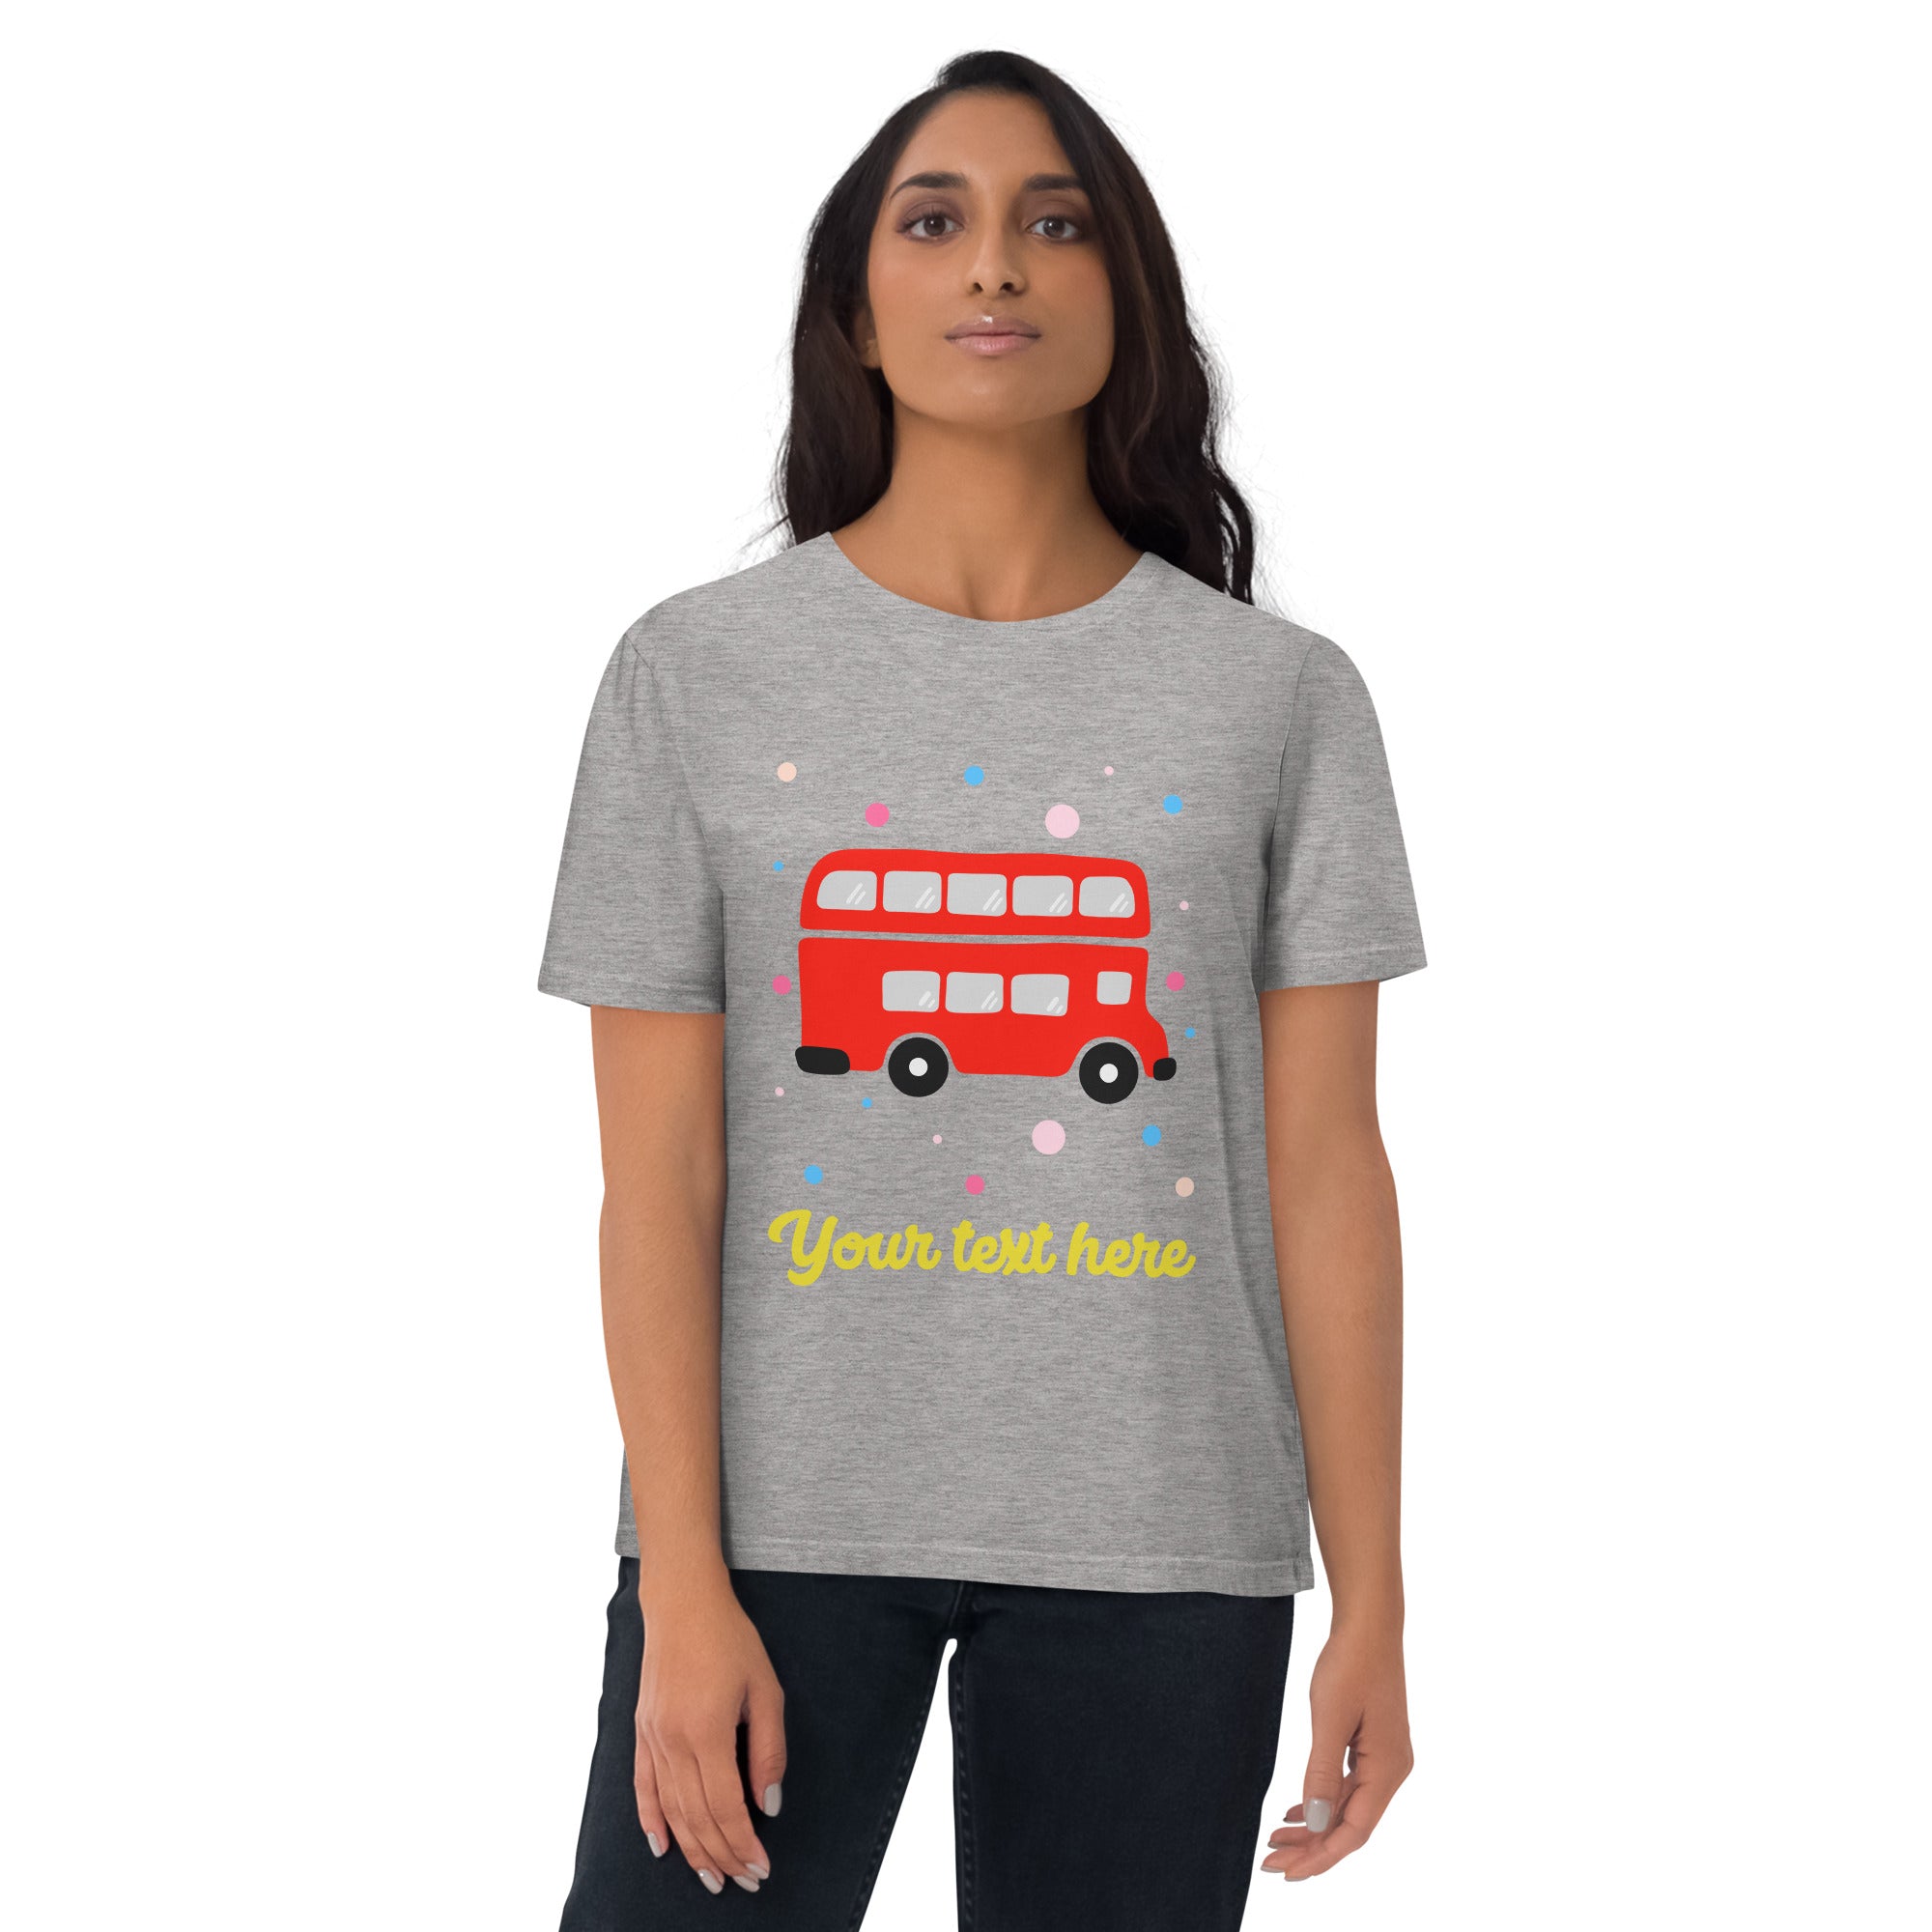 Personalised Custom Text - Organic Cotton Adults Unisex T-Shirt - London Doodles - Red Bus - Heather Grey 2